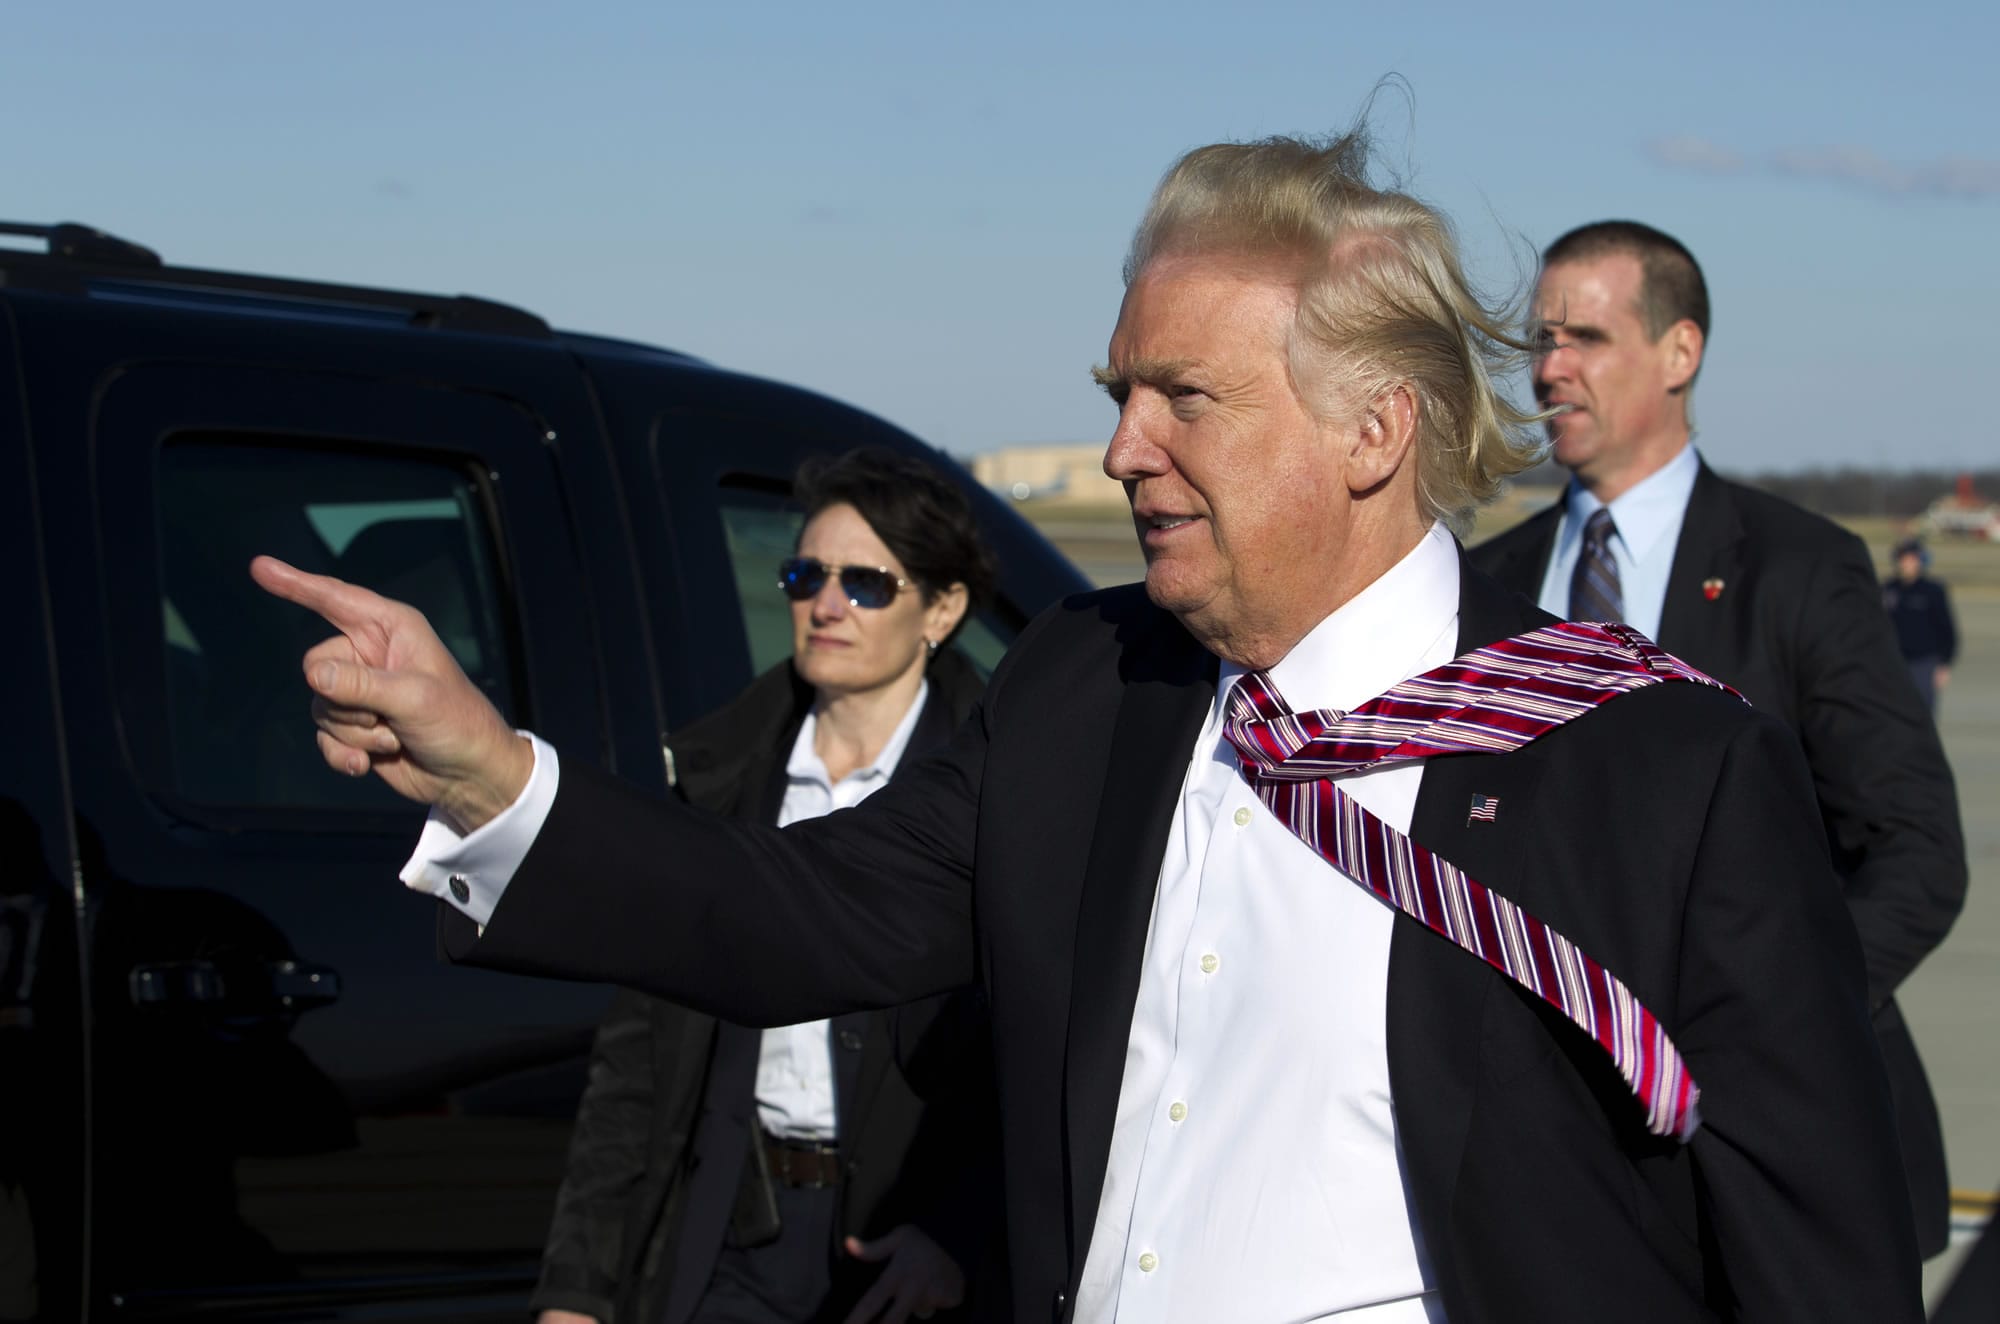 President Donald Trump points to guests upon his arrival at Andrews Air Force One, Md., Thursday, Jan. 26, 2017. Trump is returning from Philadelphia after speaking at the House and Senate GOP lawmakers at their annual policy retreat.